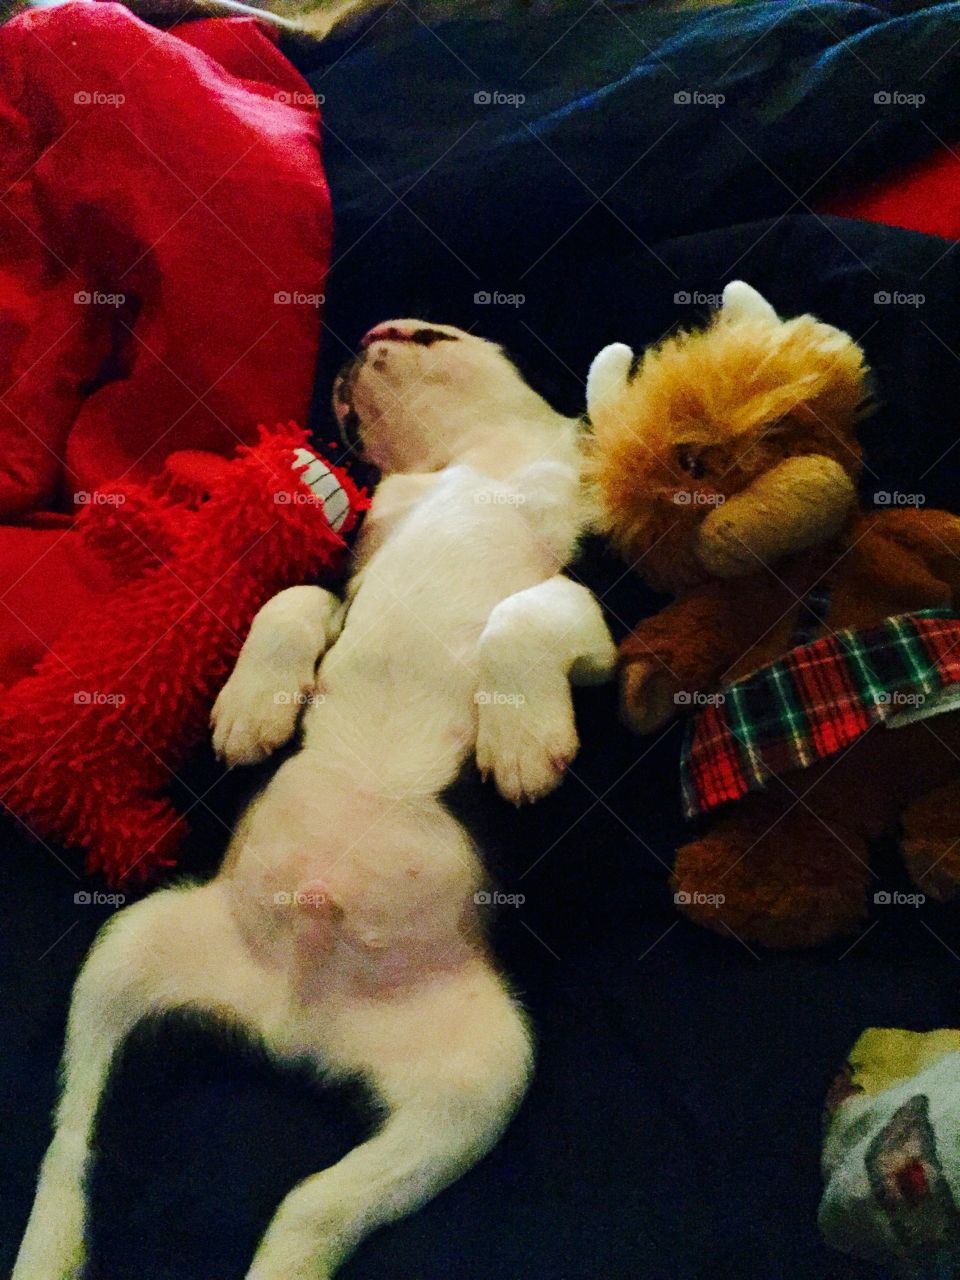 Youthful puppy napping